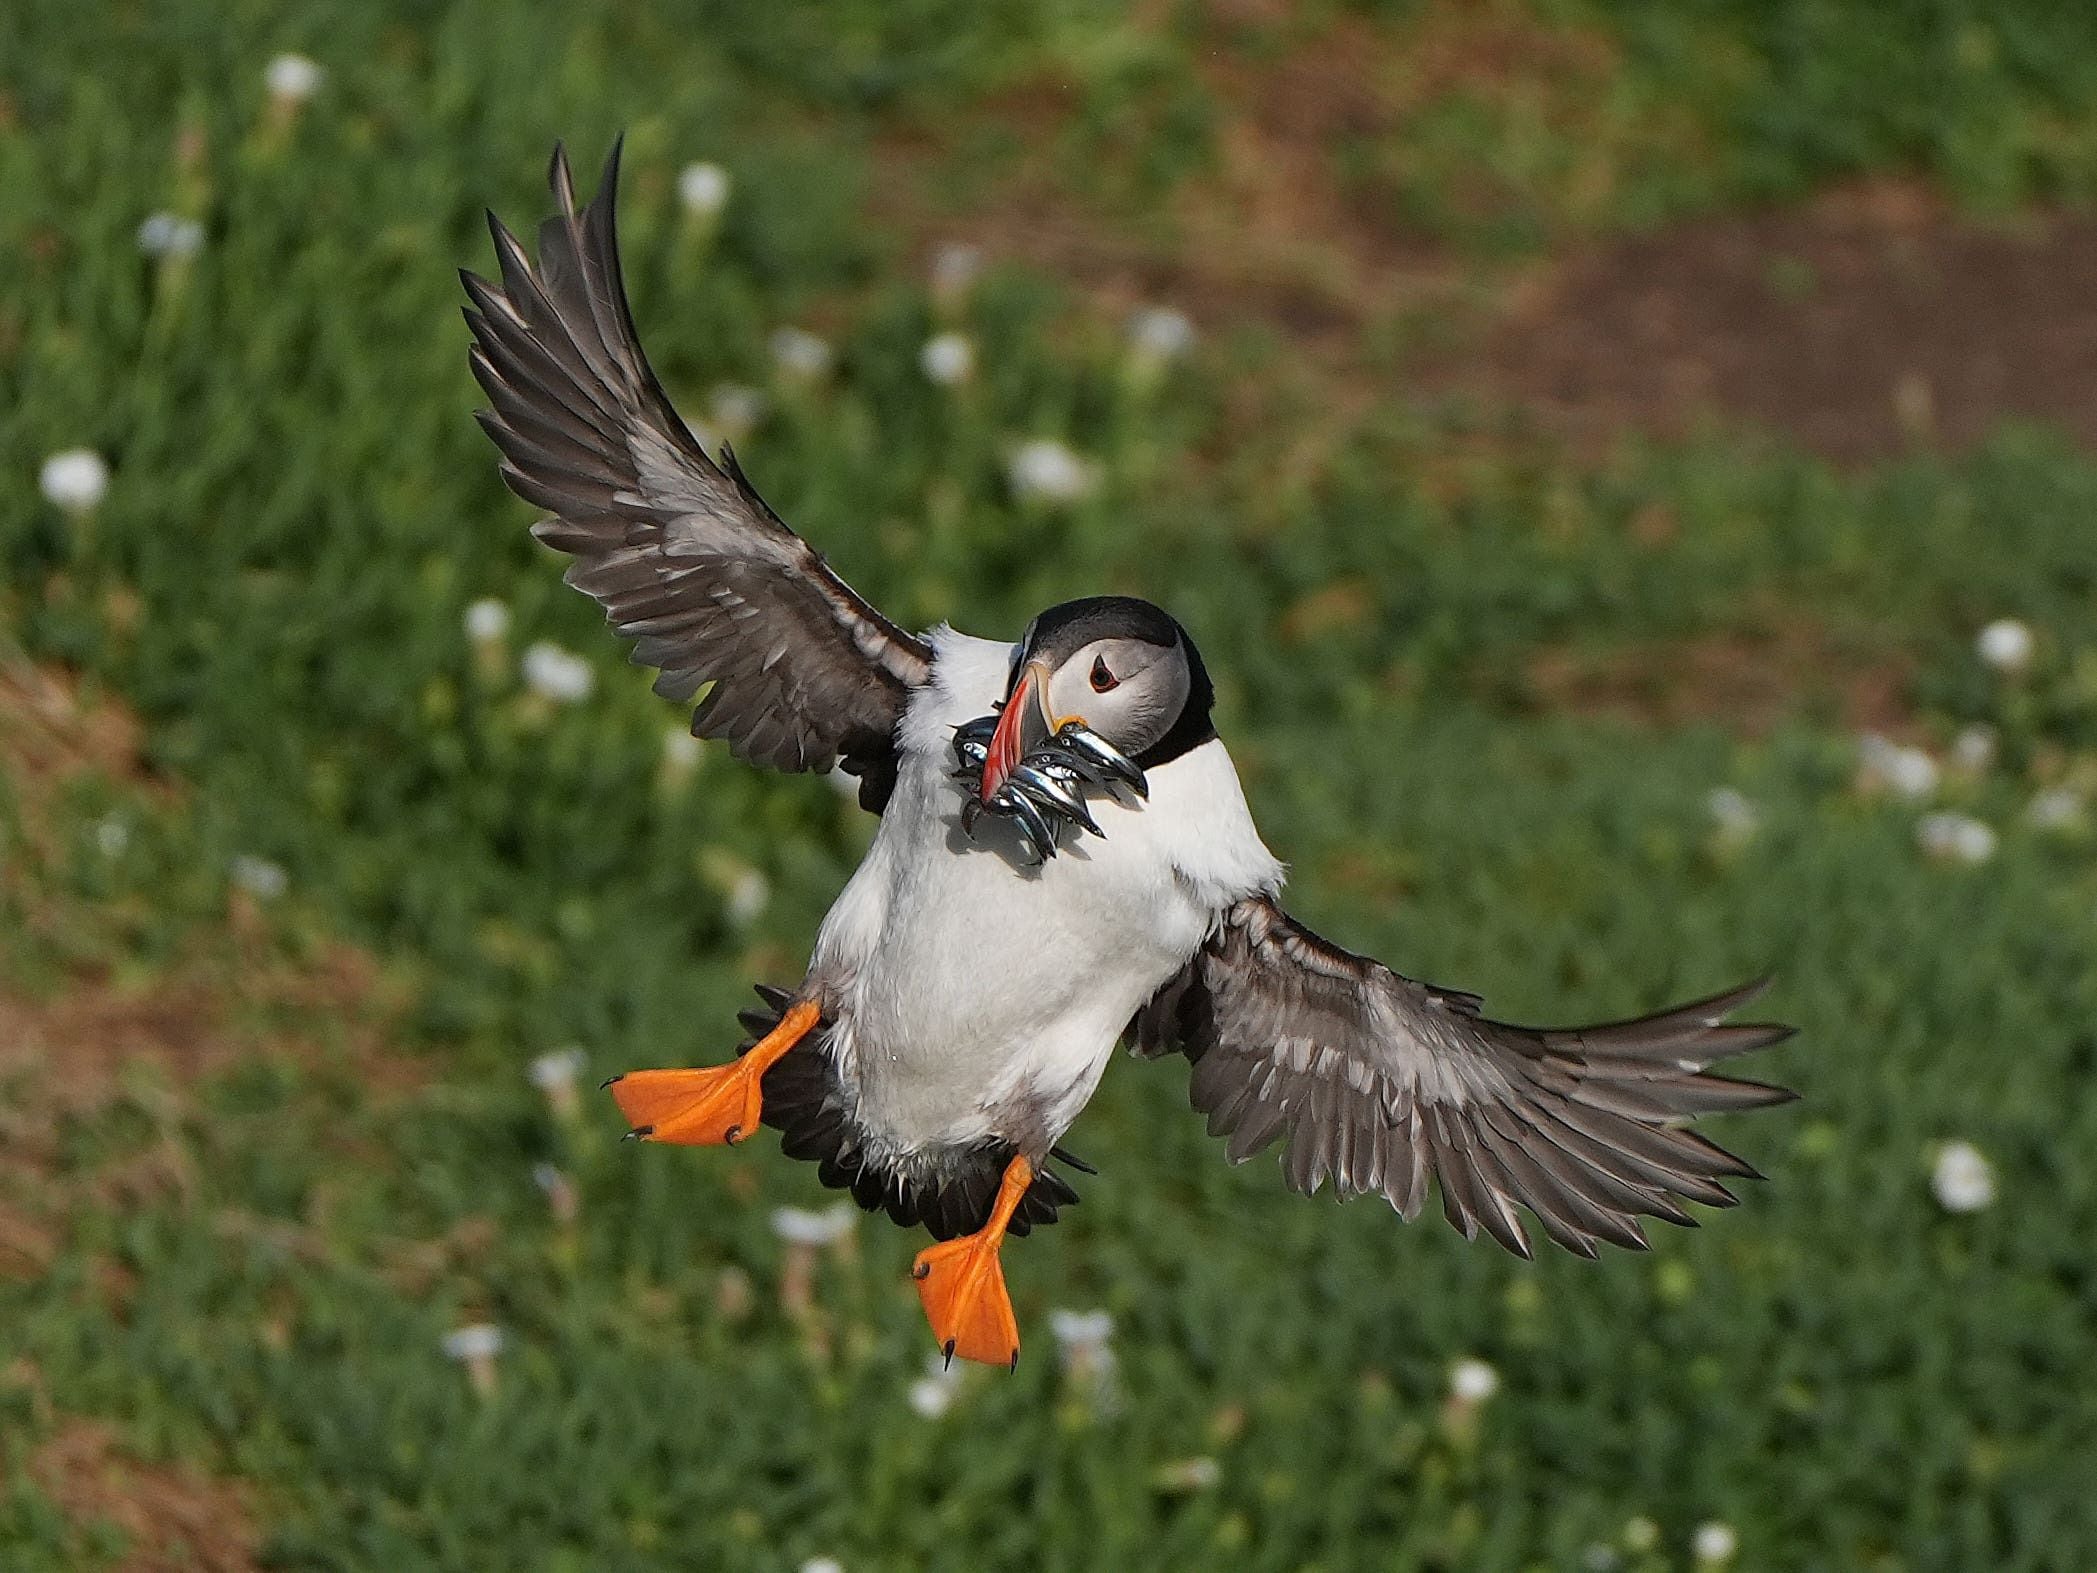 Protection area could mean brighter future for puffins on Saltee Islands